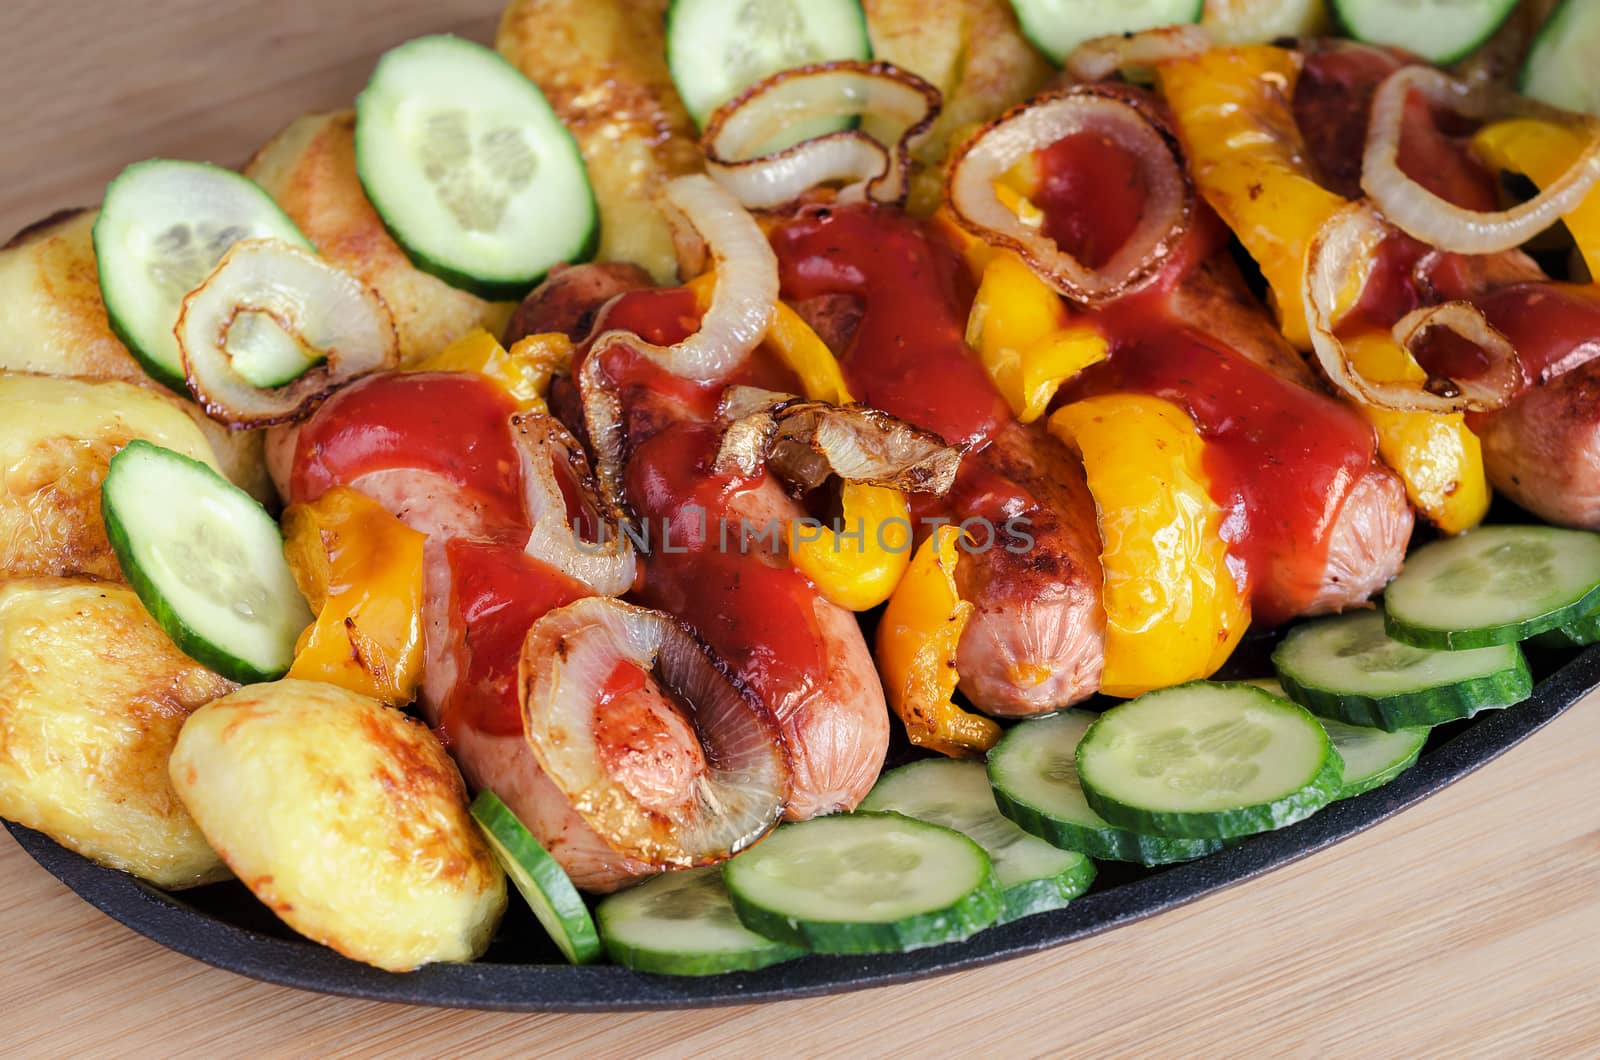 Sausage on a platter with ketchup, roasted potatoes,peppers and onions. Slices of fresh cucumber, wooden background.